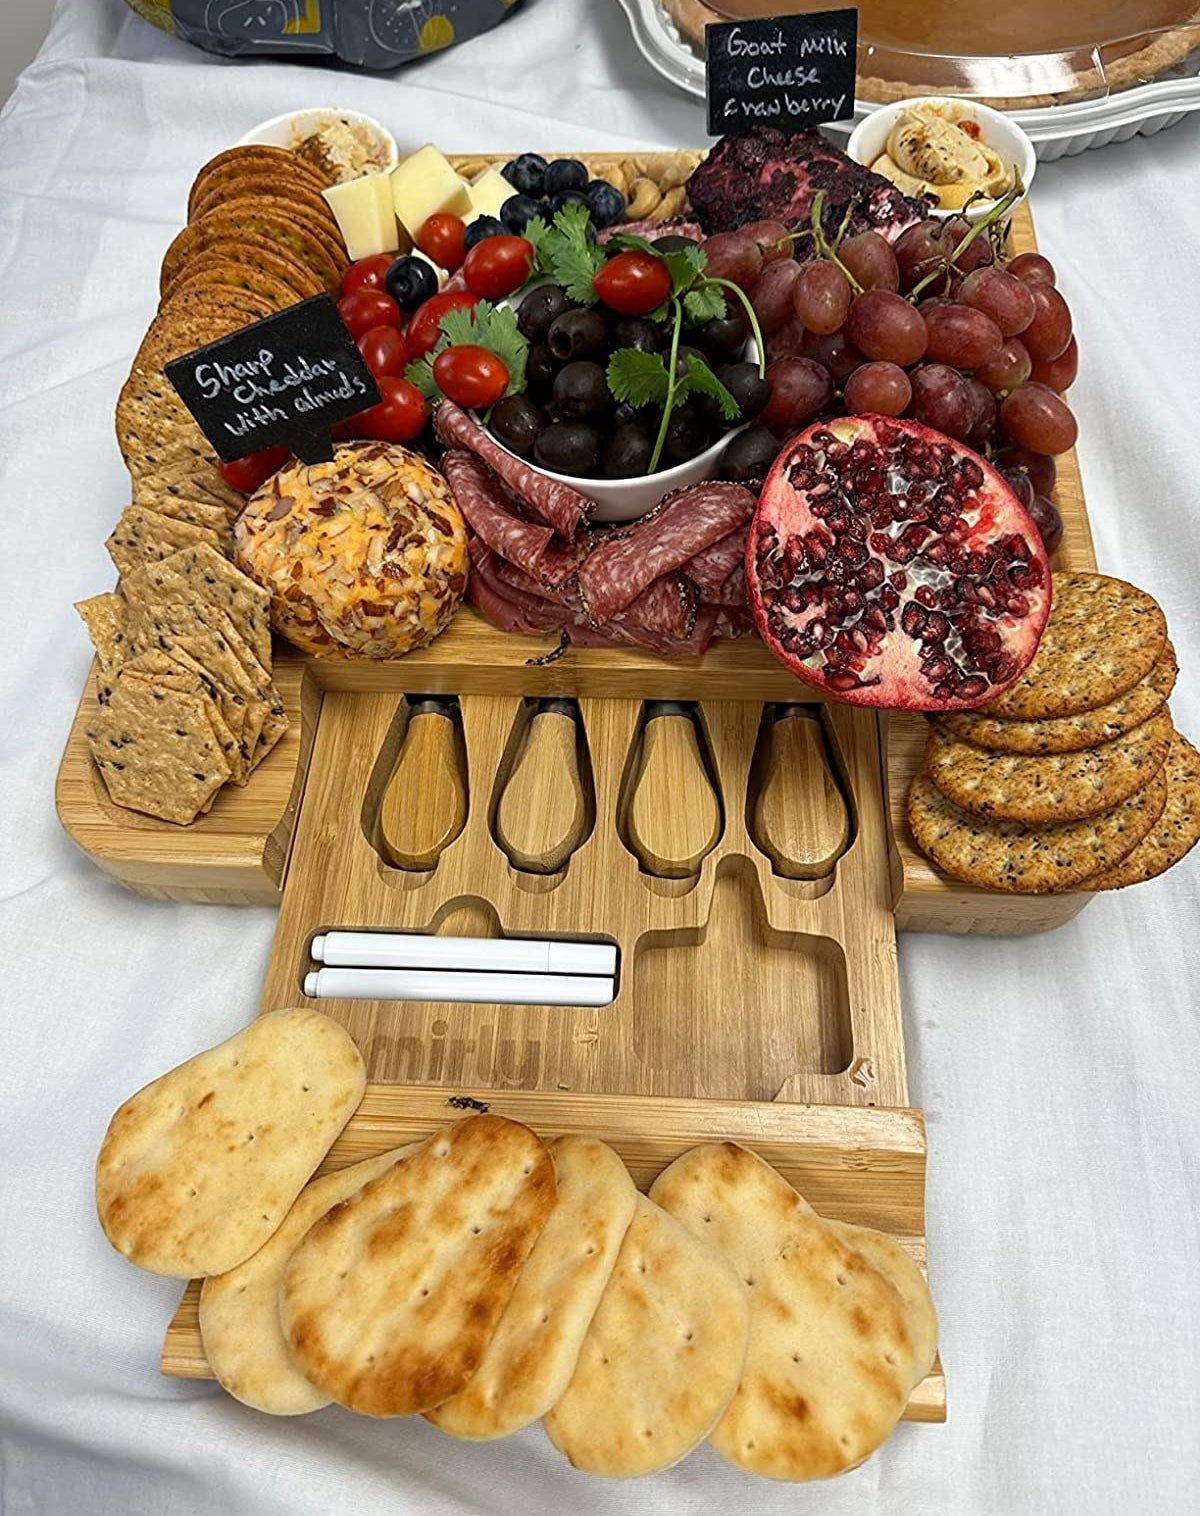 Reviewer image of board used for charcuterie